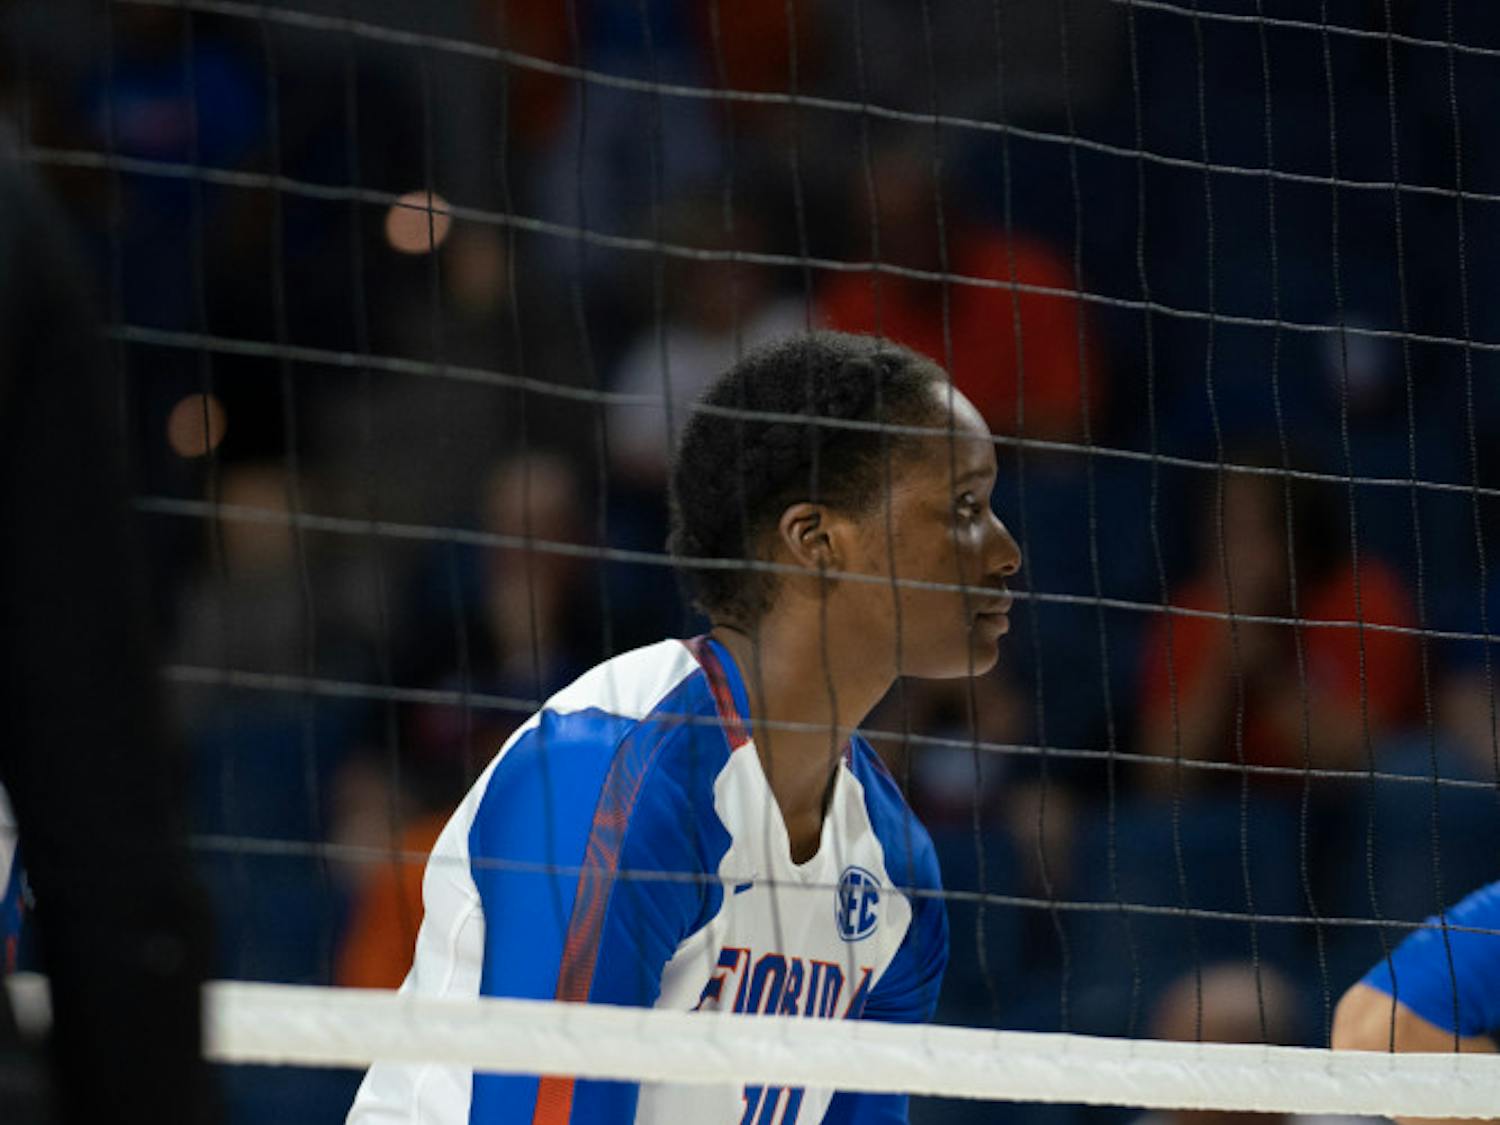 Middle blocker Taelor Kellum led the Gators in blocks (5) in their four-set triumph over Army Saturday night. Kellum also registered nine kills, good for third on the team. 